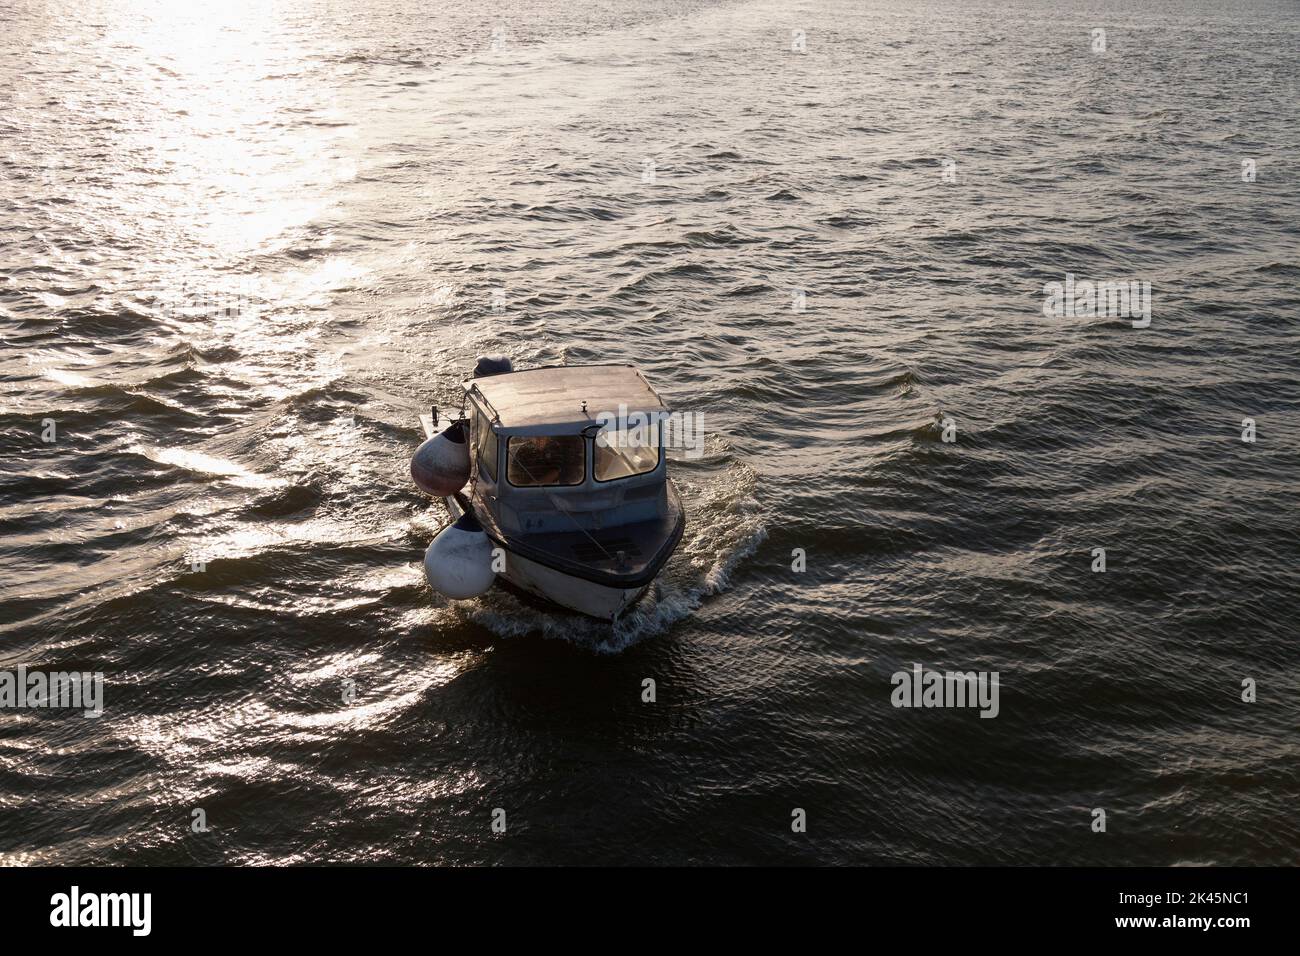 A small fishing boat on the sea at sunset, elevated view. Stock Photo